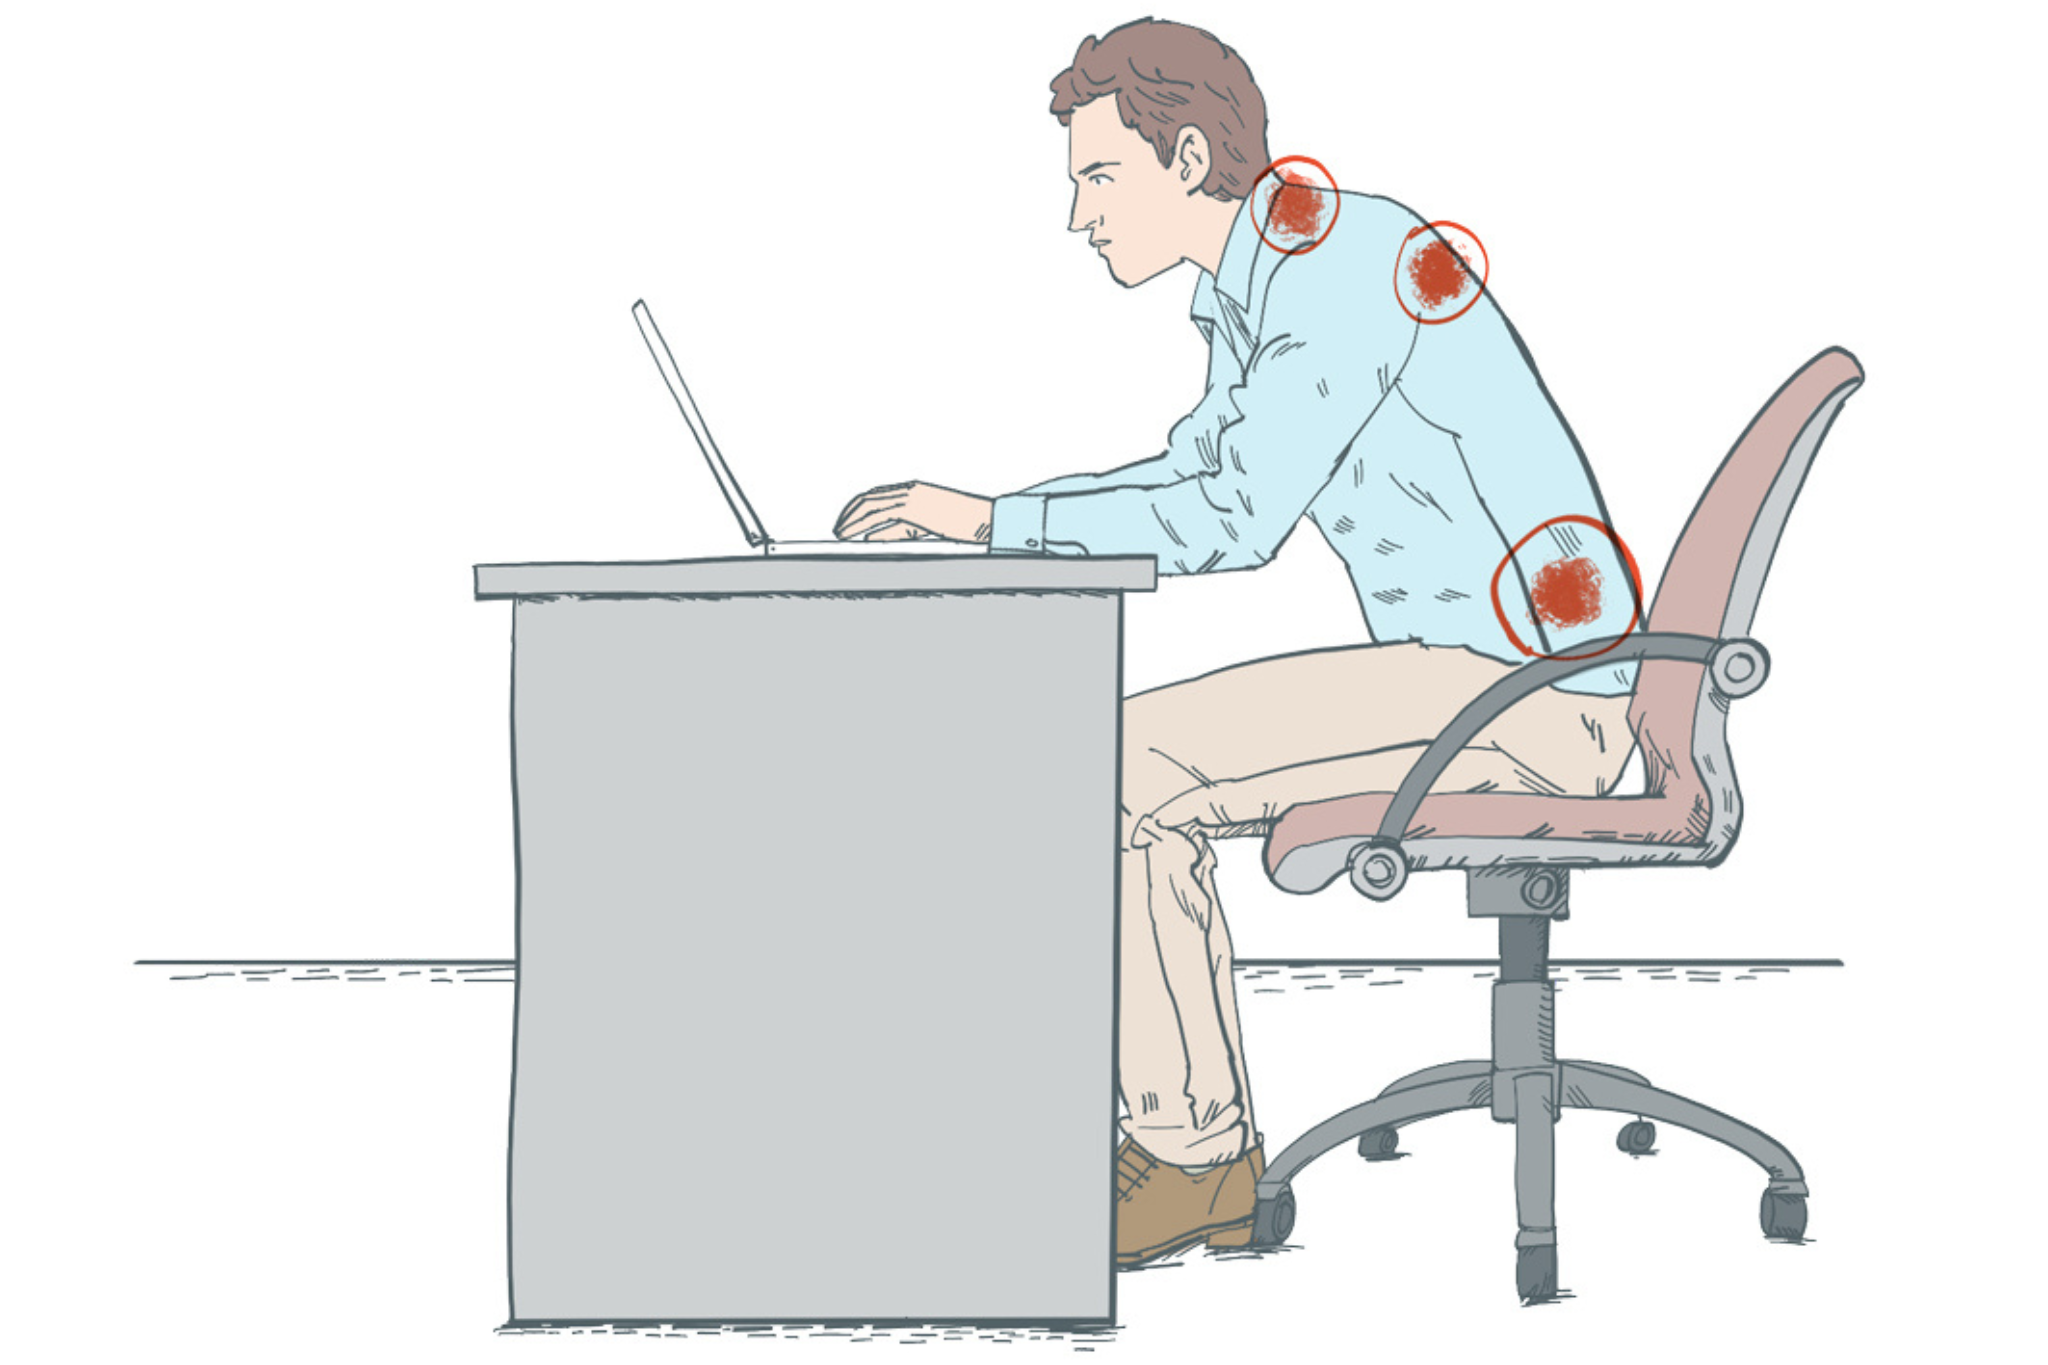 How to sit properly and avoid injury